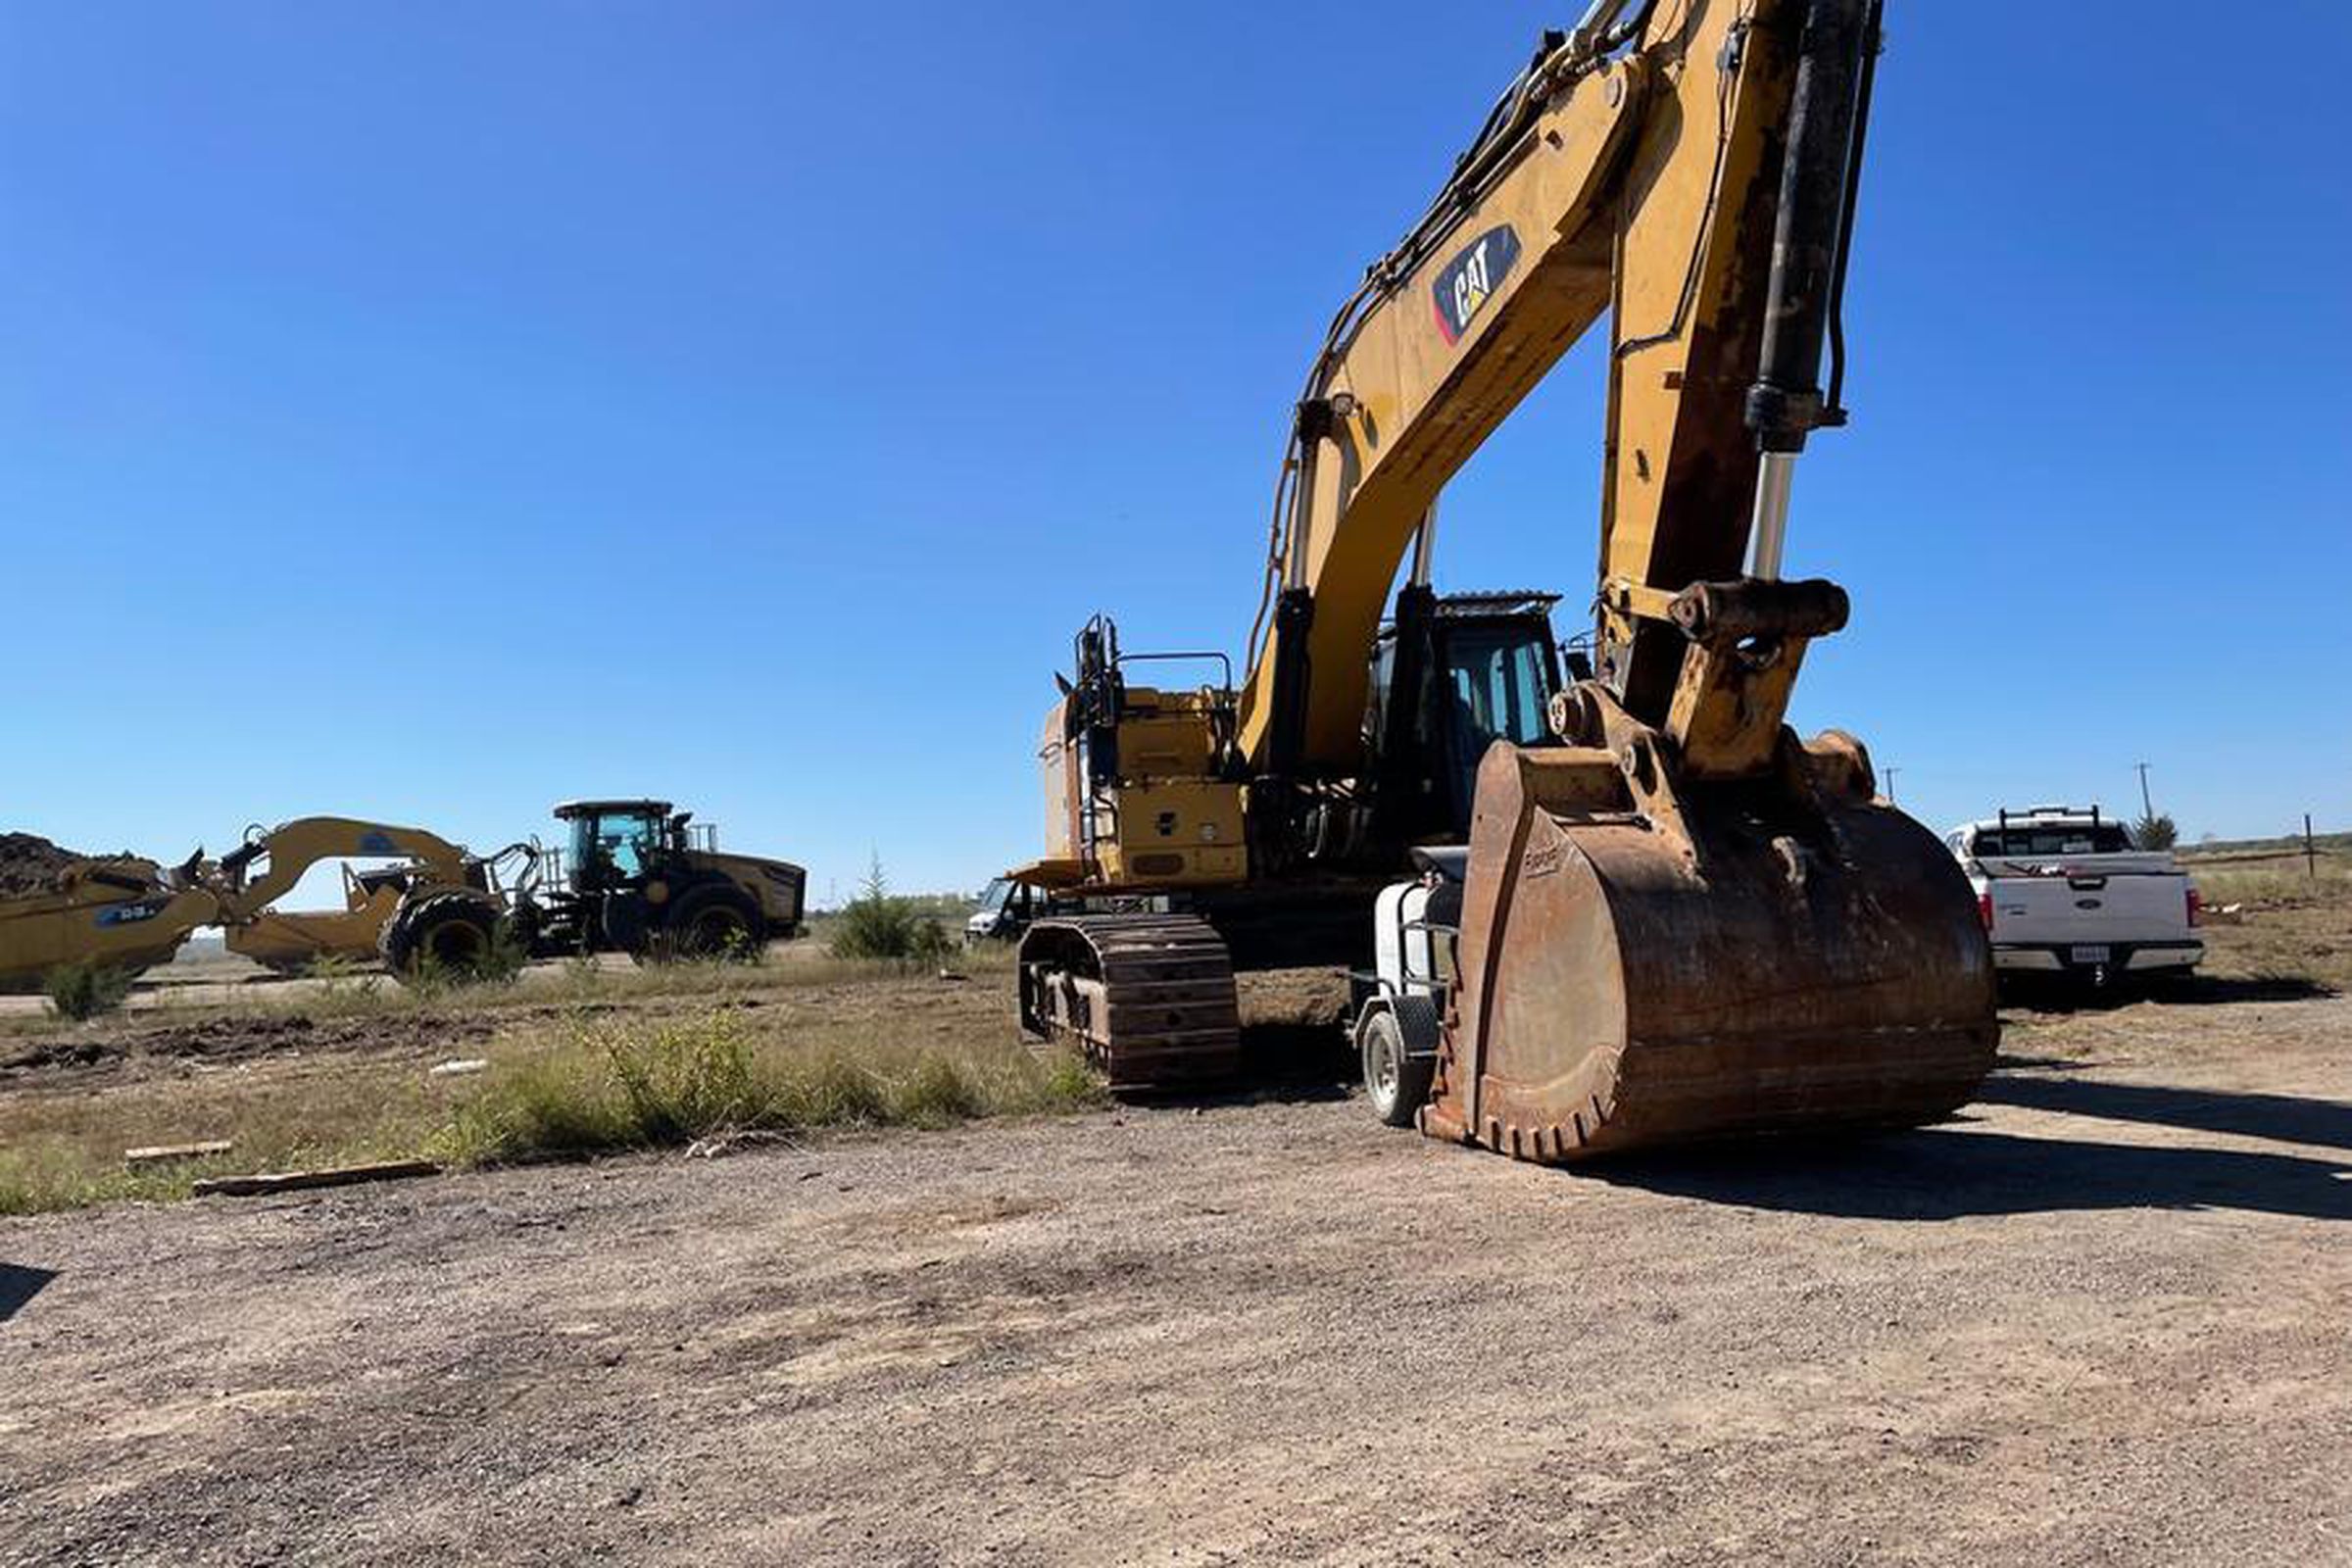 Construction equipment at the site of Panasonic’s new EV battery factory in Kansas